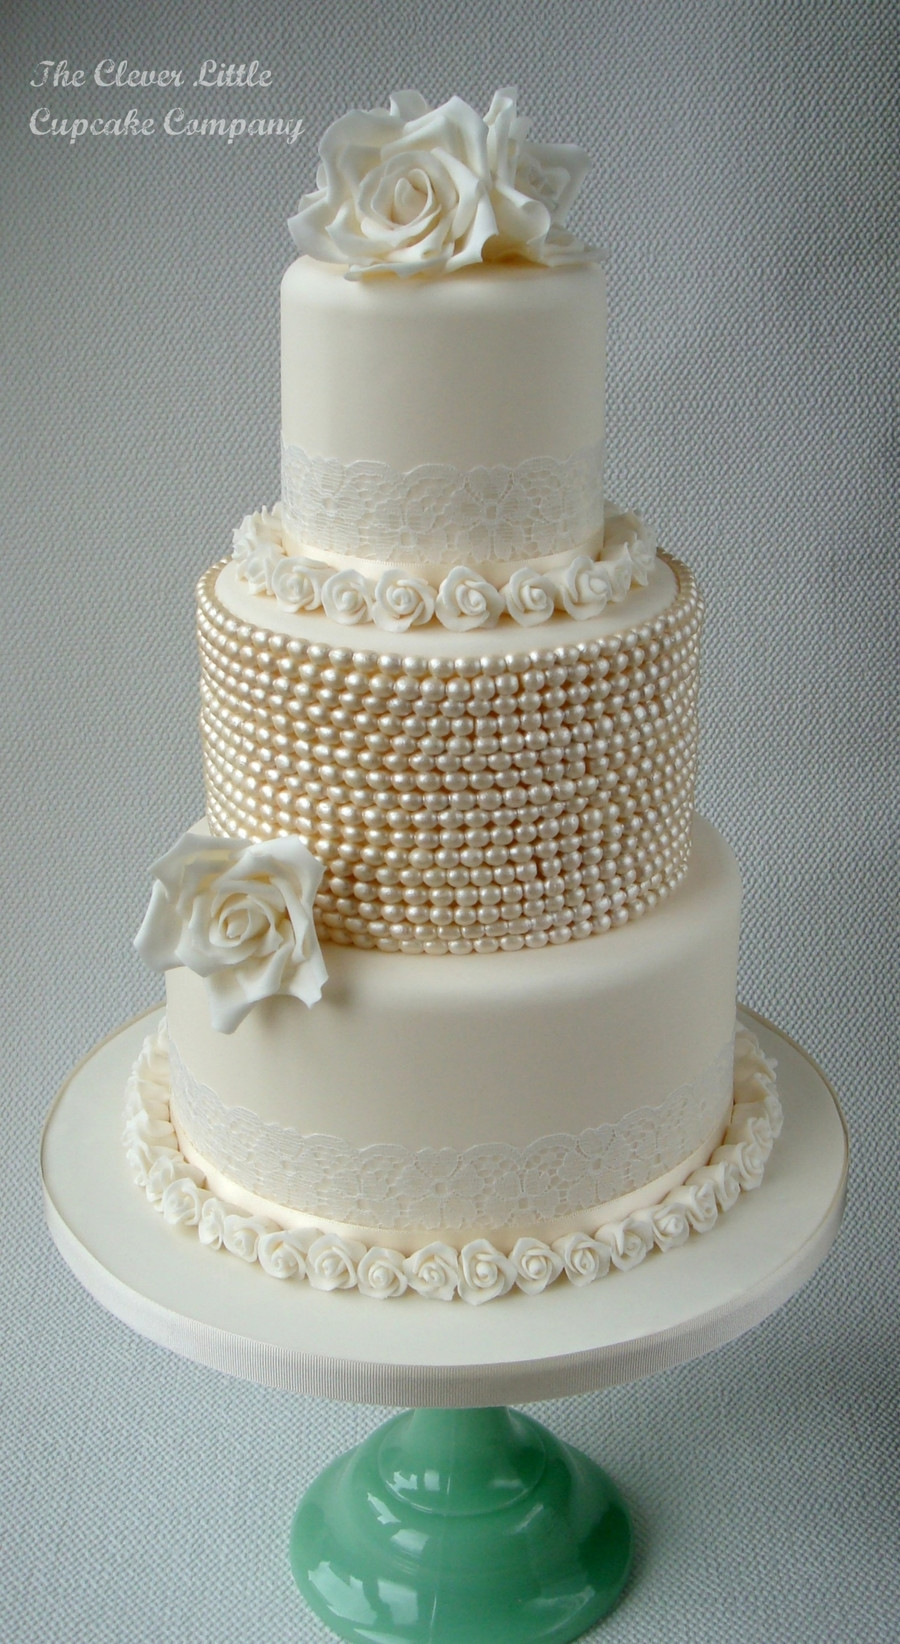 Vintage Style Wedding Cakes
 Vintage Lace And Pearl Wedding Cake CakeCentral